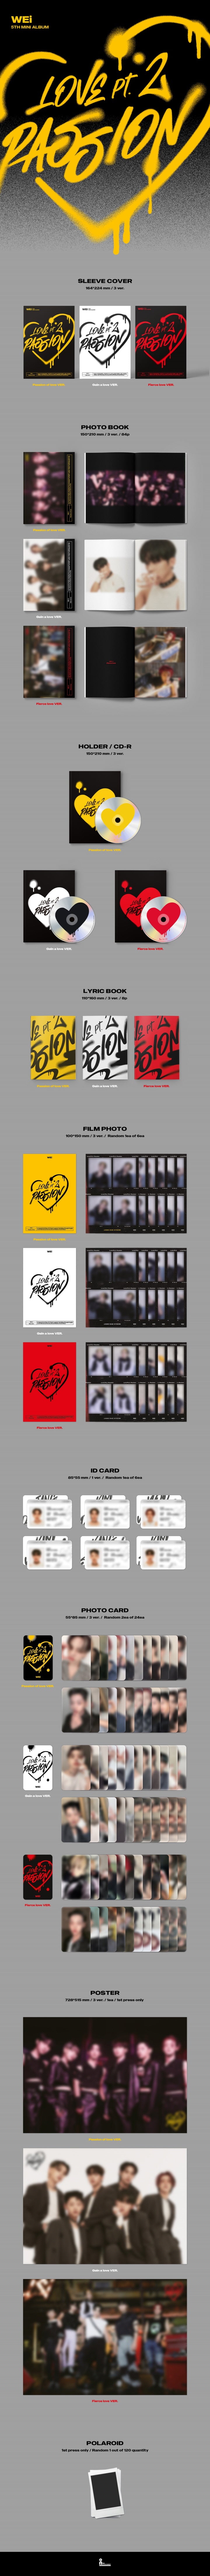 1 CD
1 Photo Book (84 pages)
1 CD Holder
1 Lyric Book (8 pages)
1 Film Photo (random out of 6 types)
1 ID Card (random out...